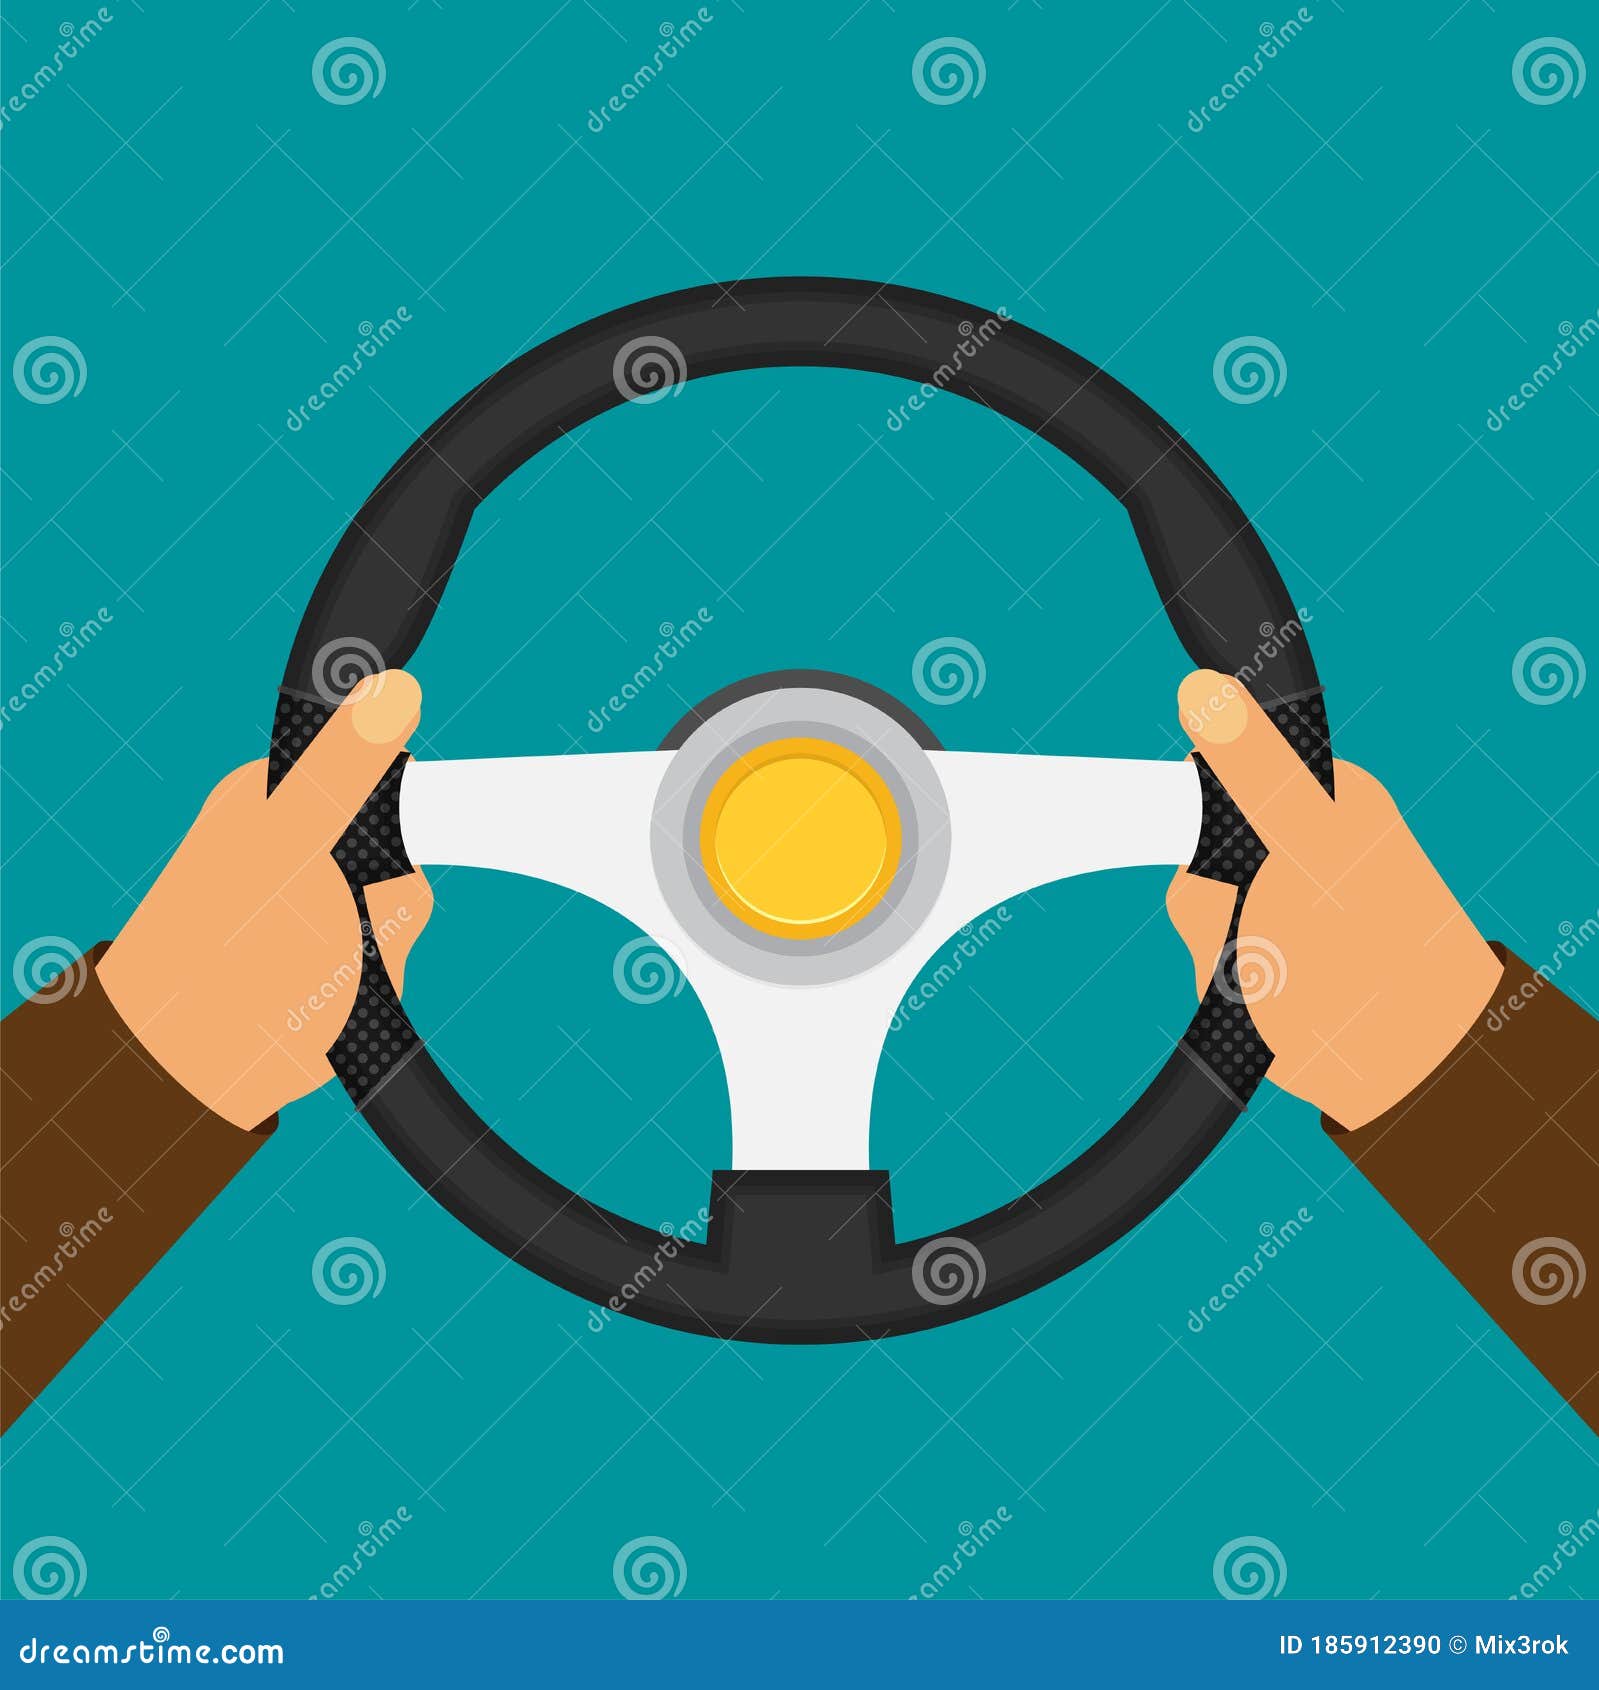 Hands Holding Steering Wheel, Vector Illustration in Flat Style Stock  Vector - Illustration of background, pictogram: 185912390